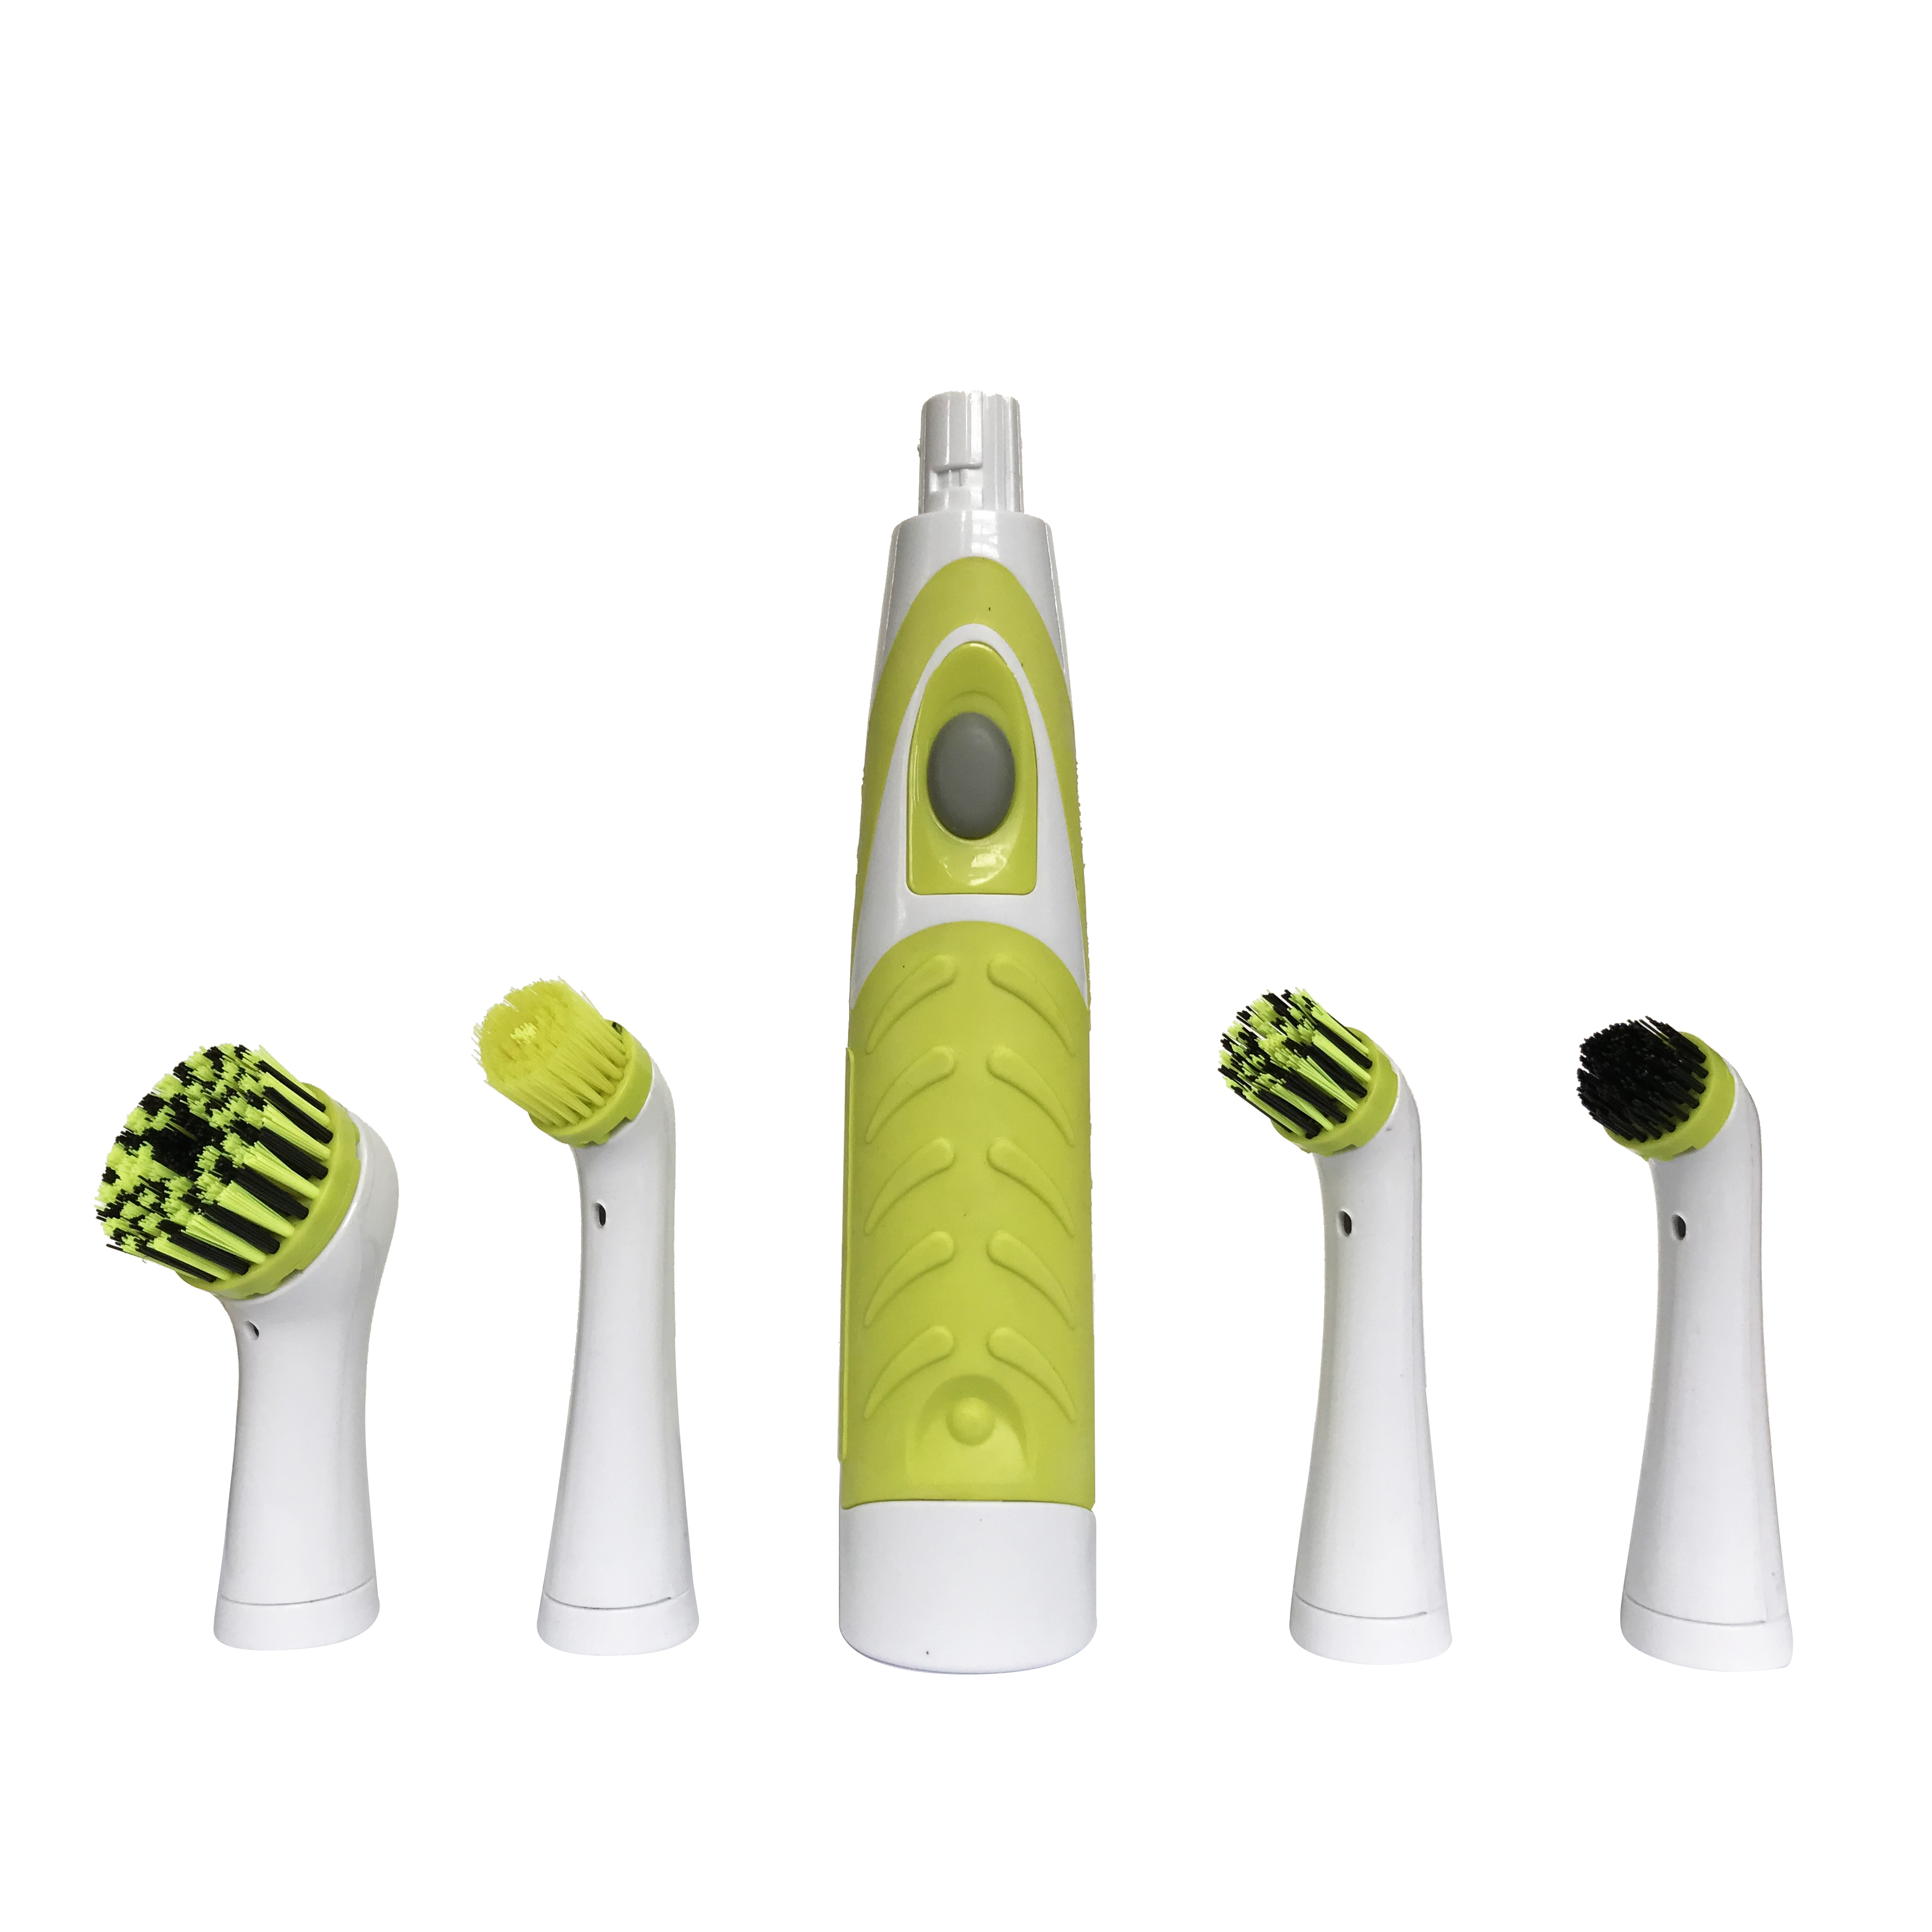 Electric Cleaning Brush Household Power Scrubber Brush Super Sonic Scrubber with replacements applicators - 2 